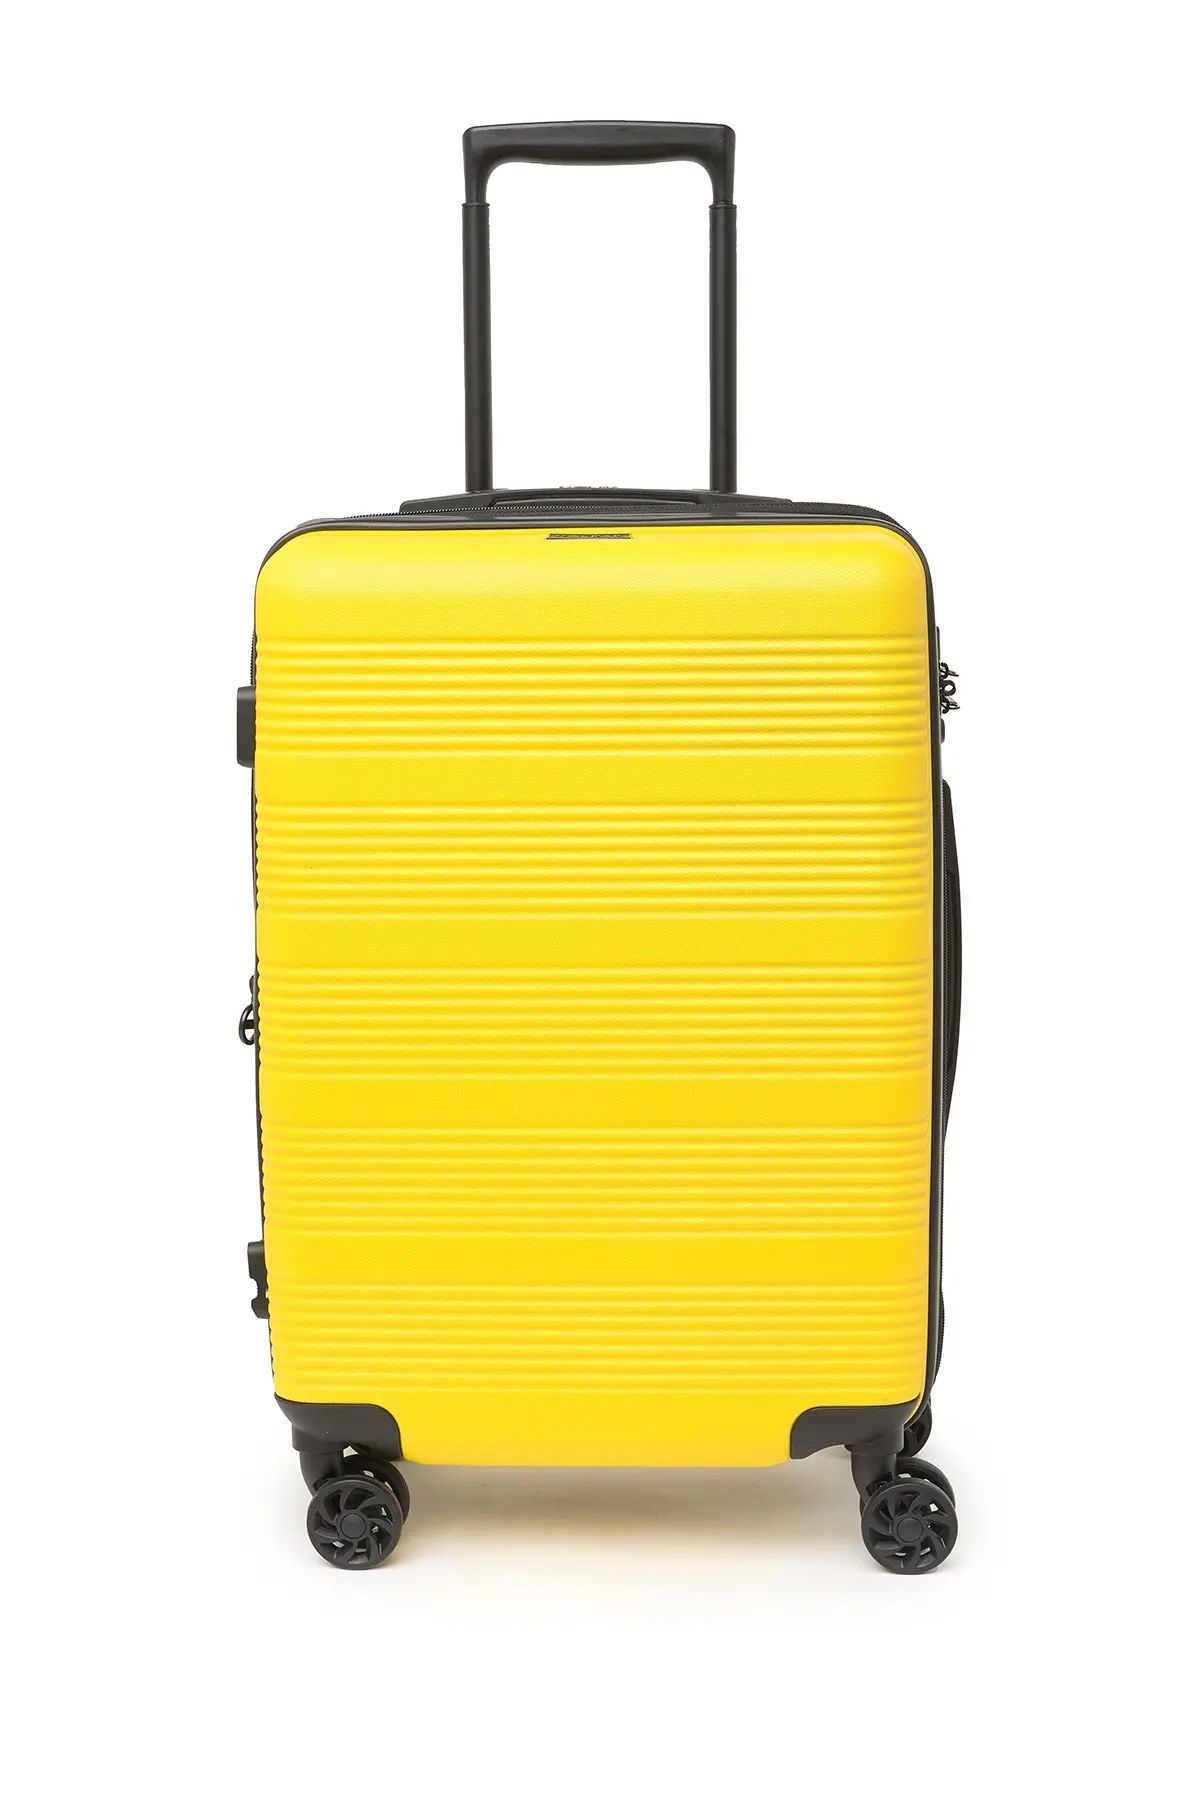 CALPAK LUGGAGE Indio Collection 20" Carry-On Spinner at Nordstrom Rack | Nordstrom Rack